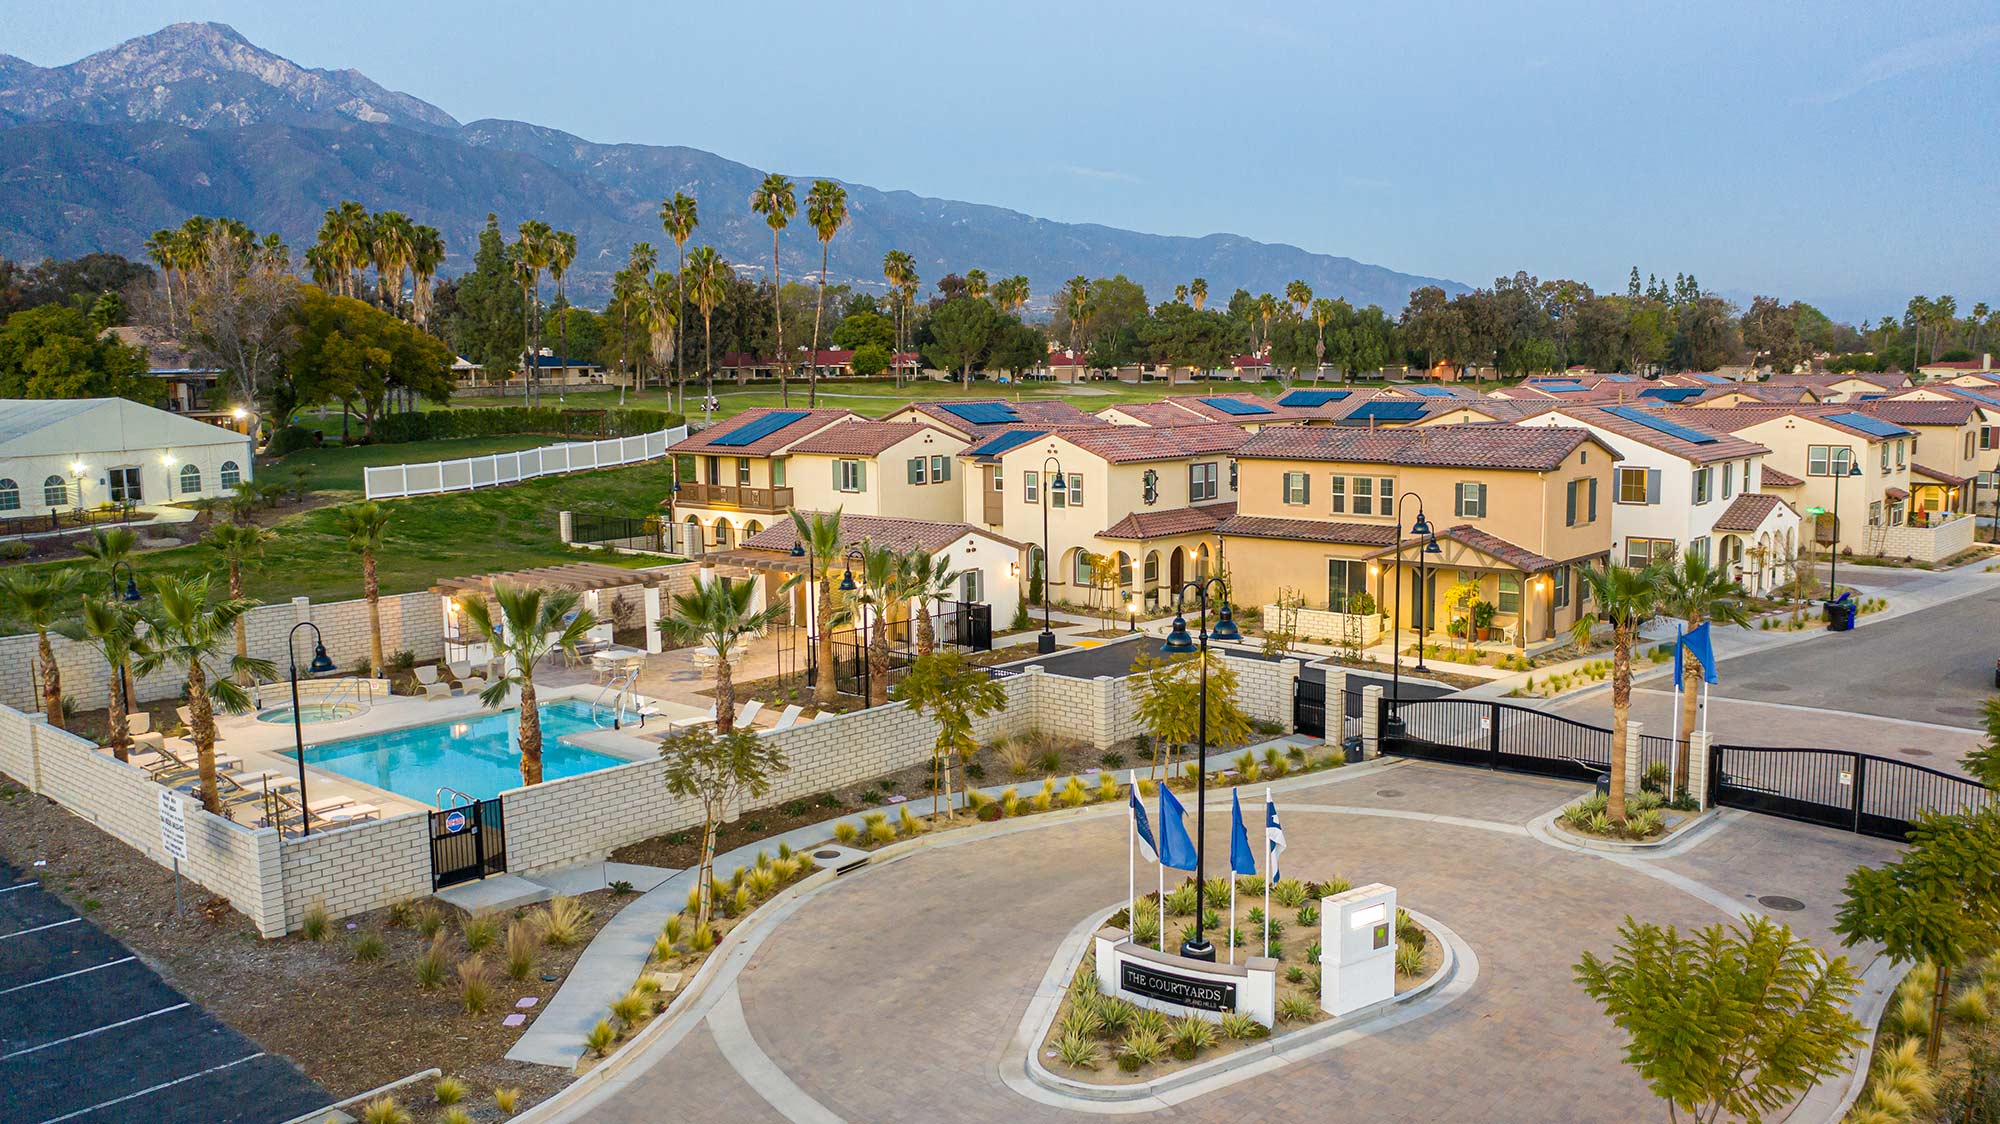 News - Diversified Pacific Announces the Grand Opening of The Courtyards at Upland Hills